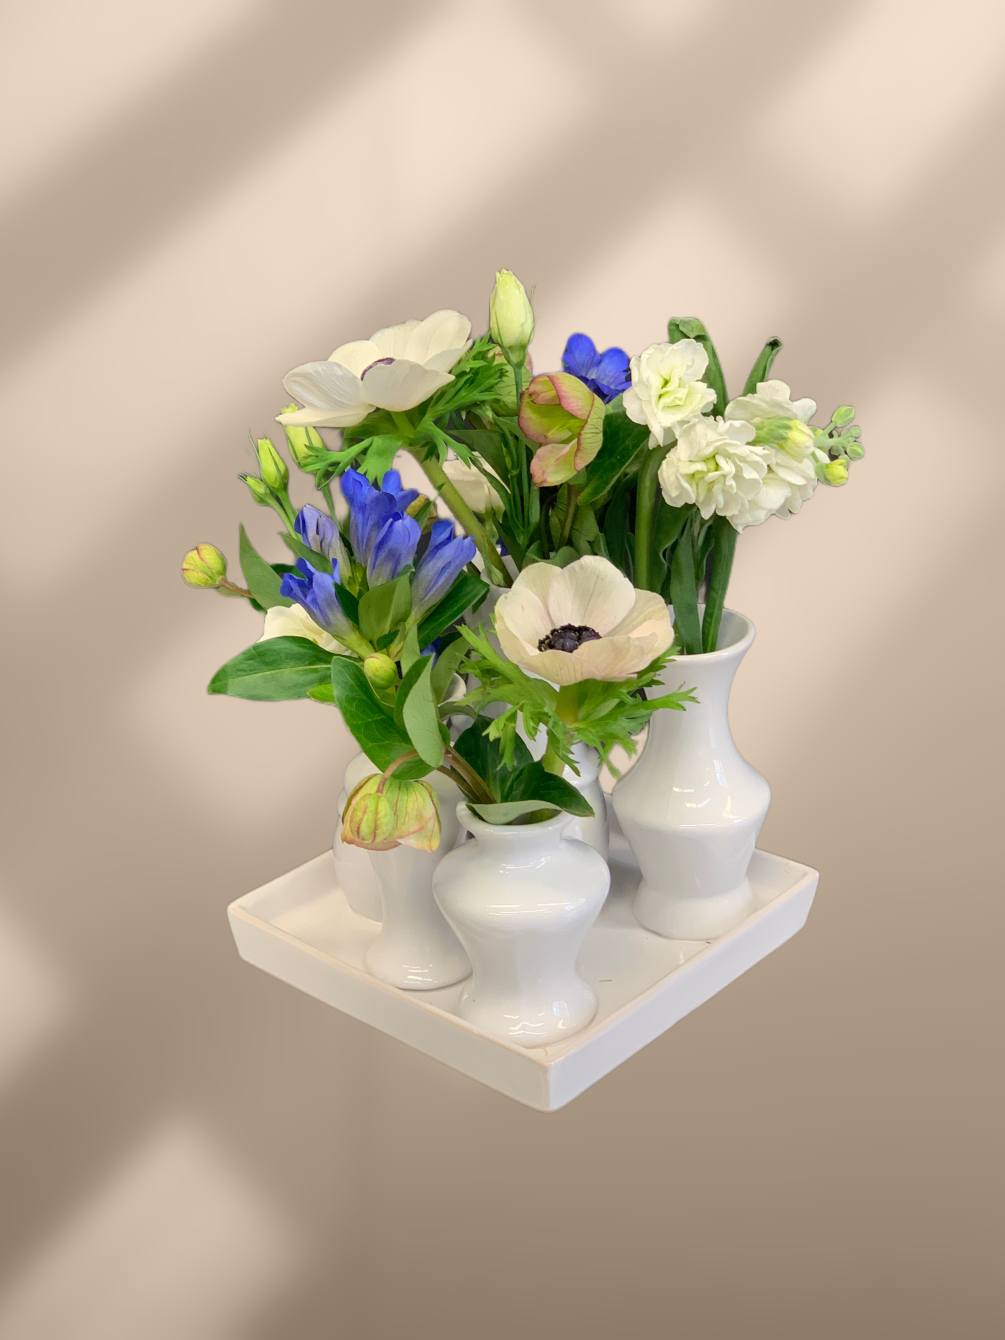 A collection of bud vases with blue and white flowers